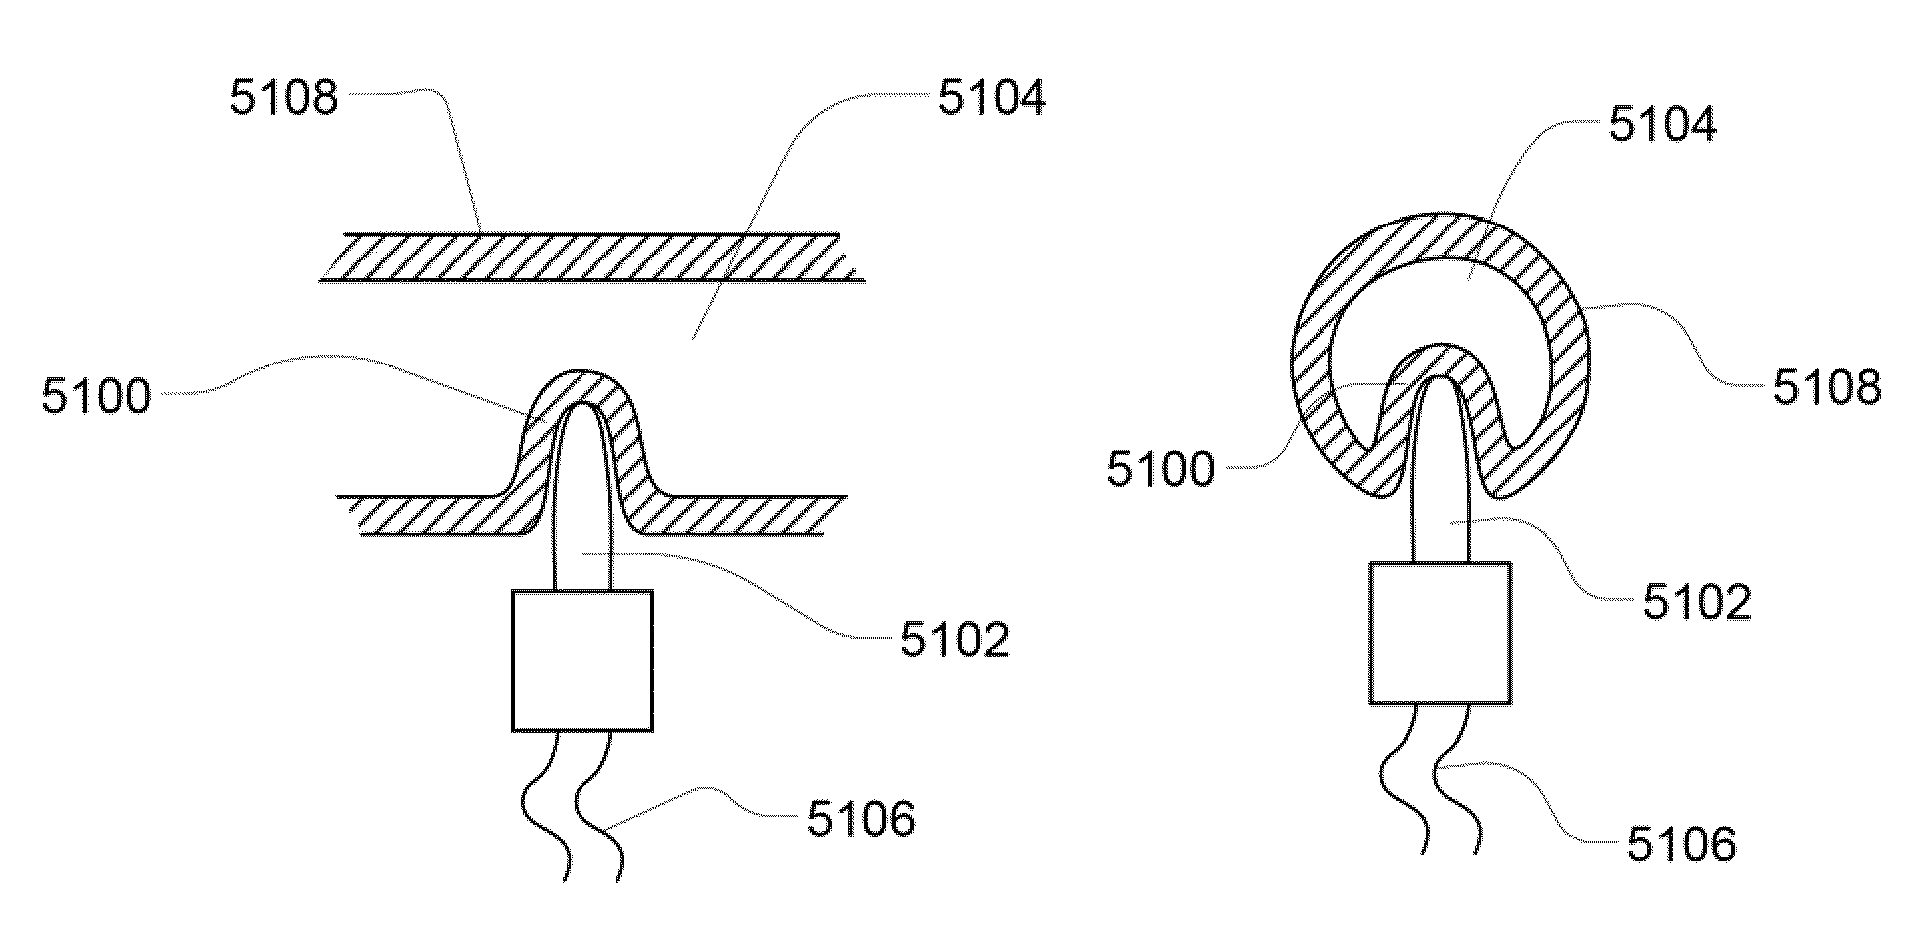 Sensor apparatus systems, devices and methods